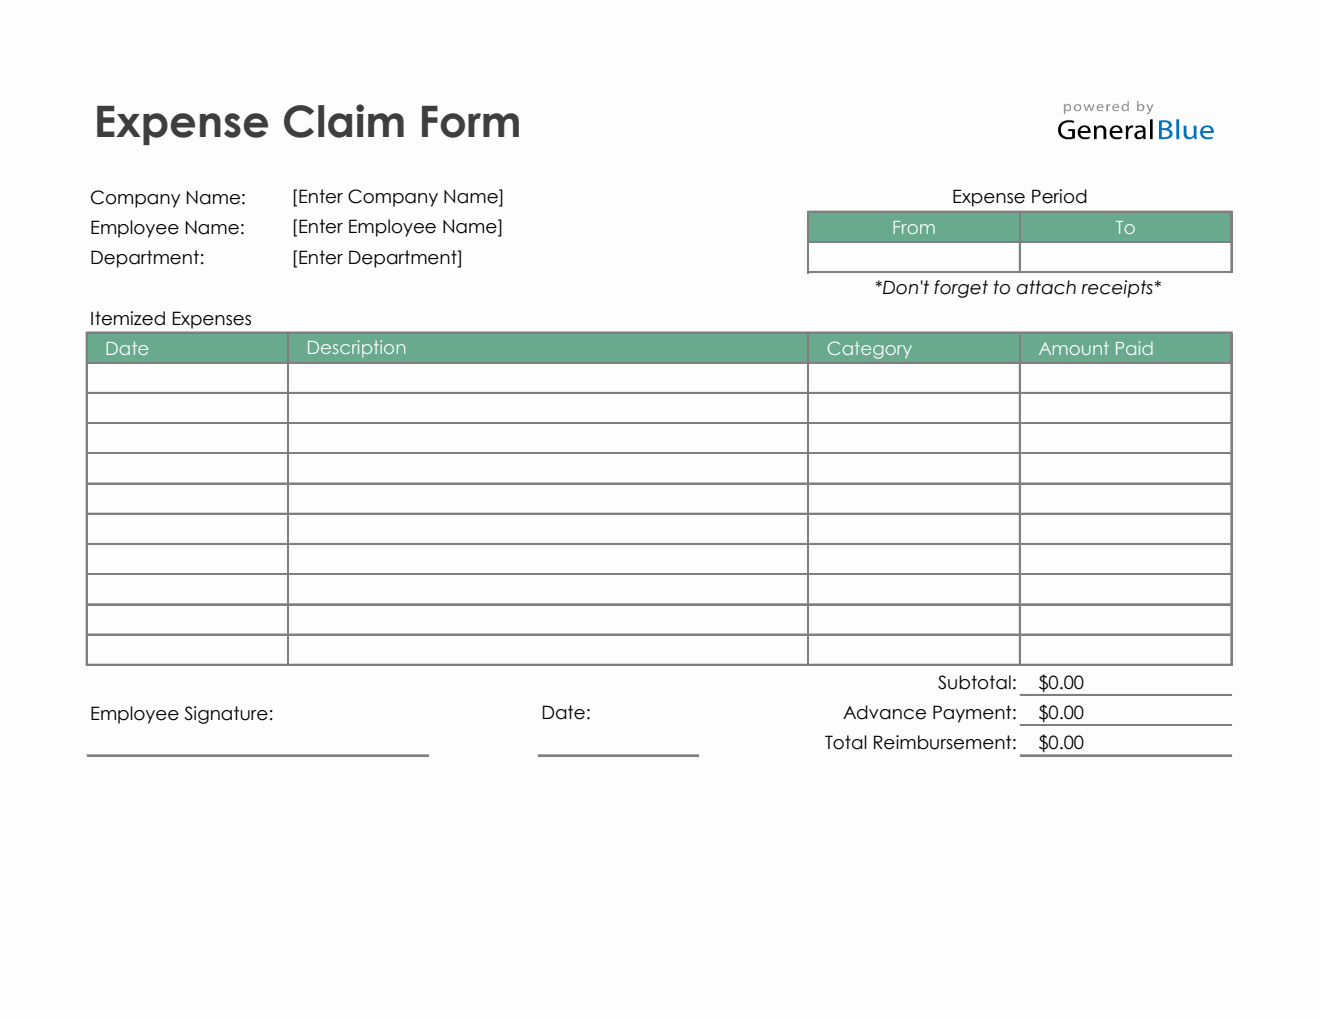 Expense Claim Form in Excel (Green)